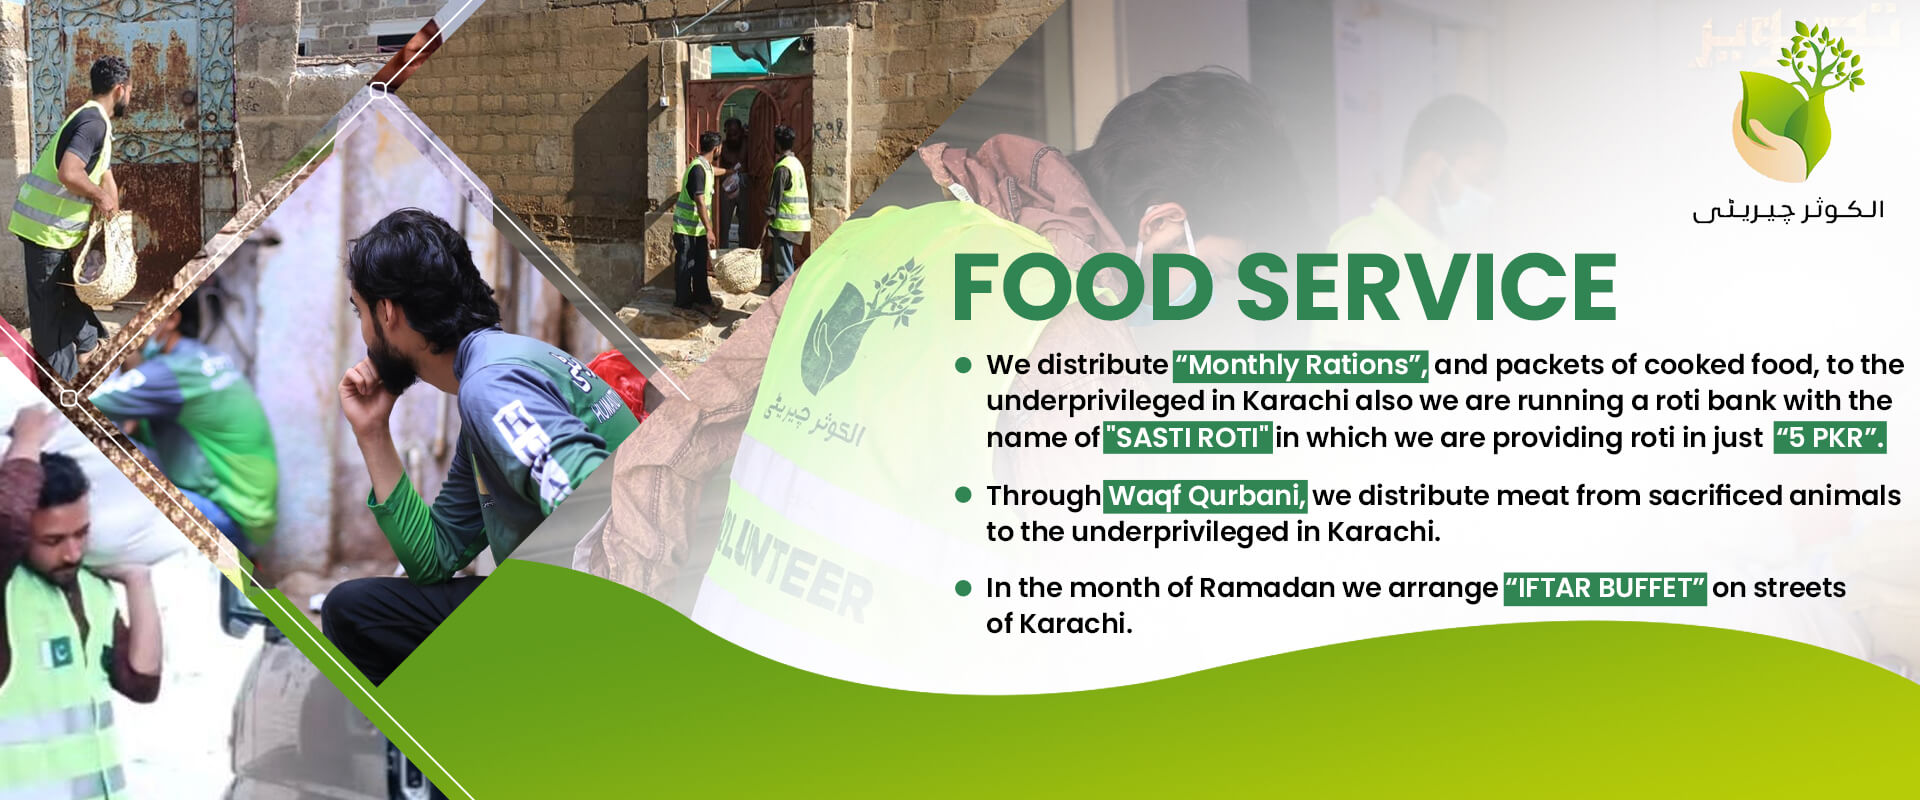 Food services banner 2